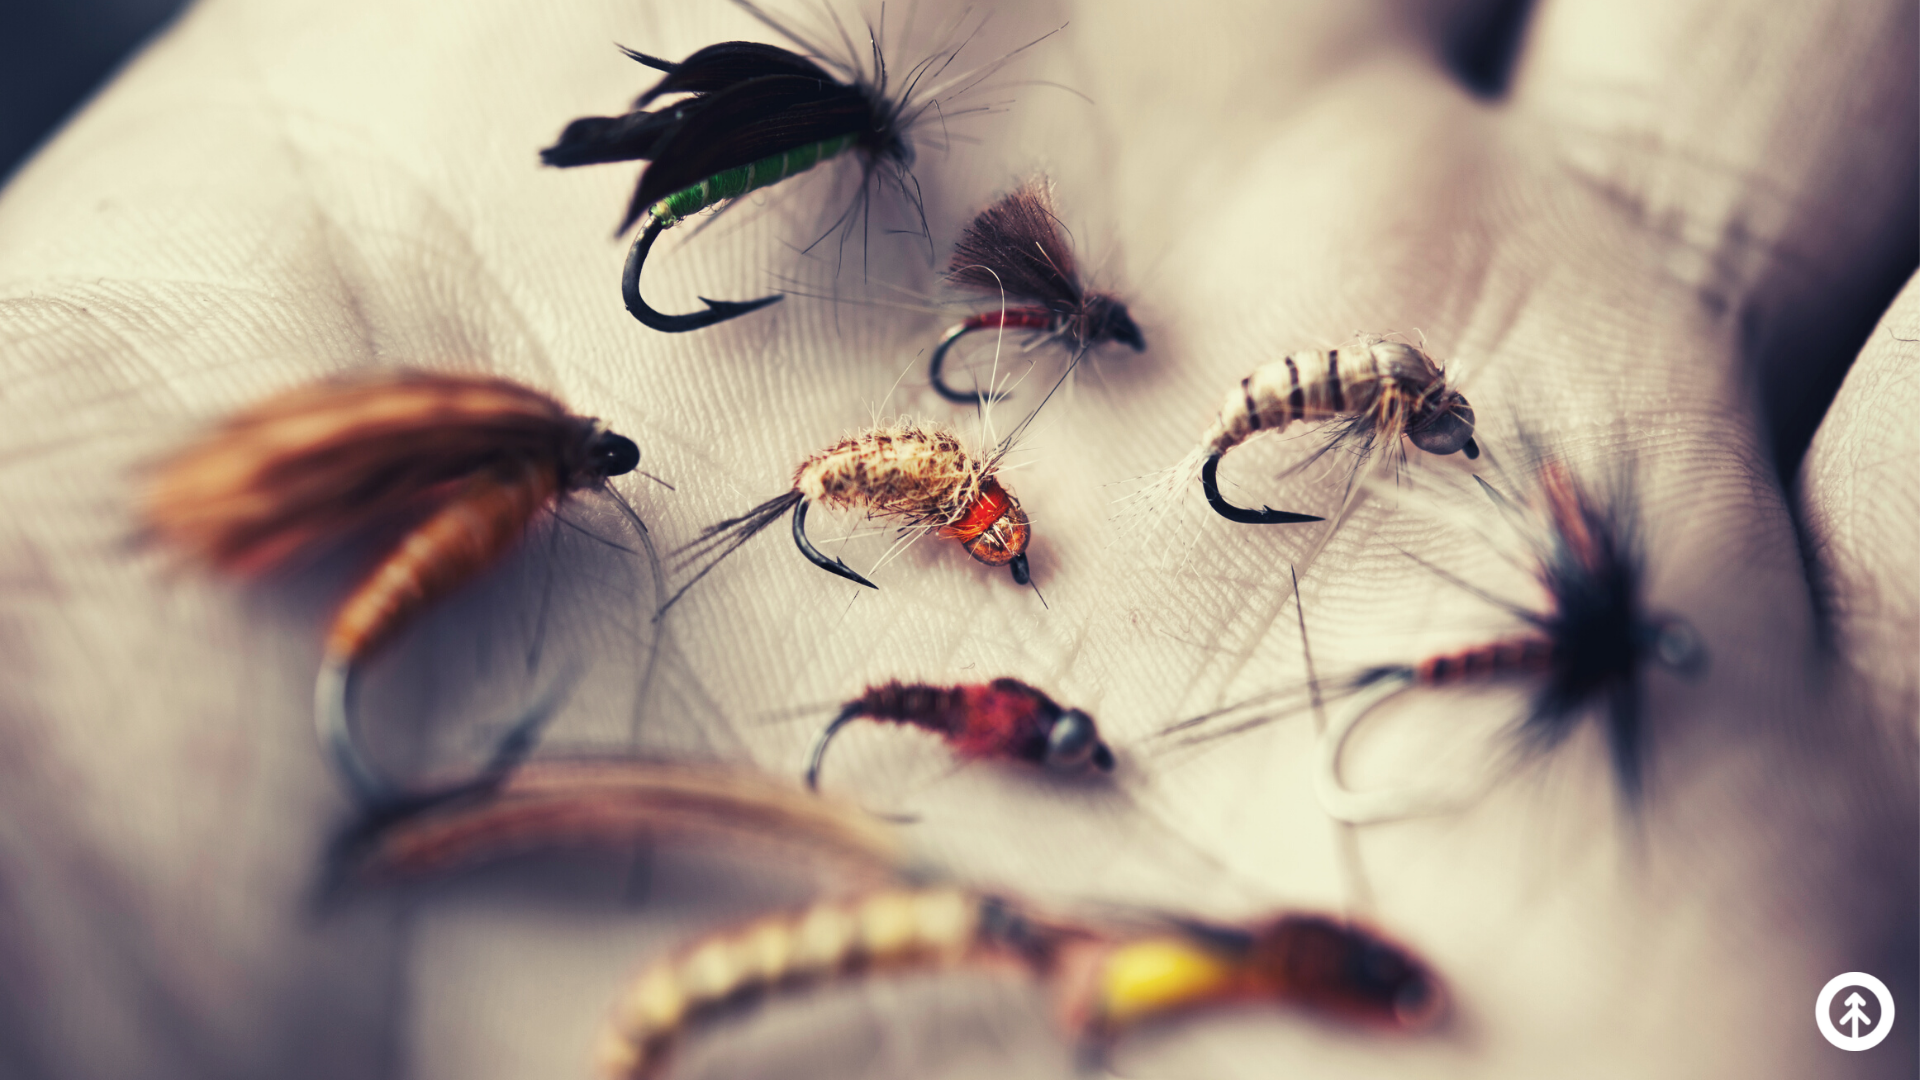 A collection of homemade fly-fishing lure on the palm of someone’s hand.